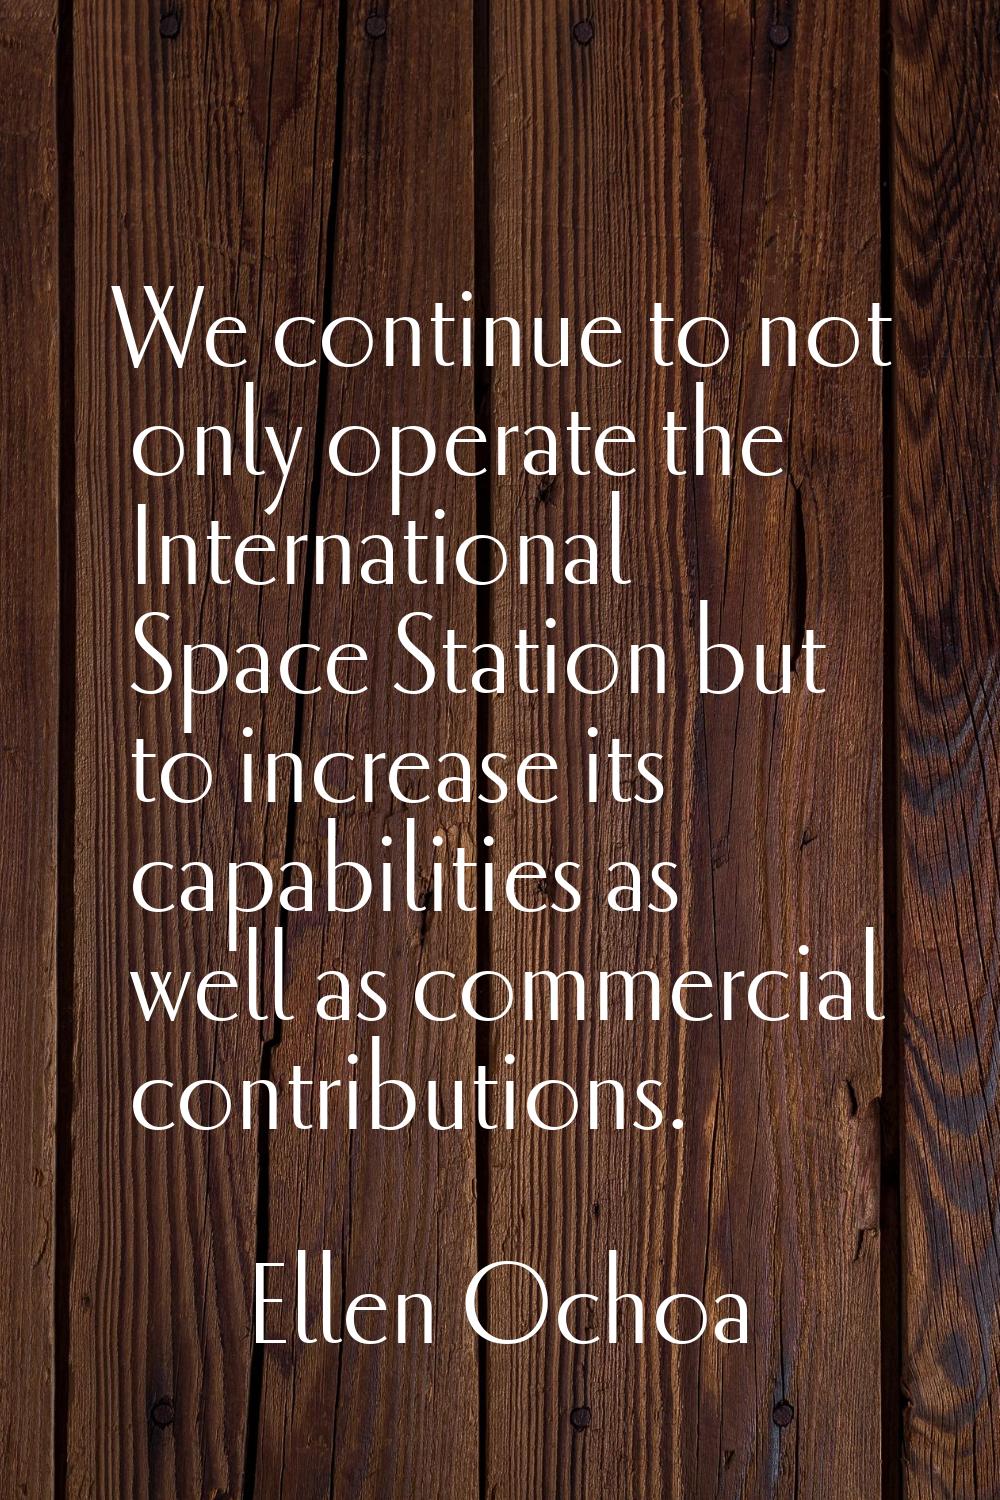 We continue to not only operate the International Space Station but to increase its capabilities as